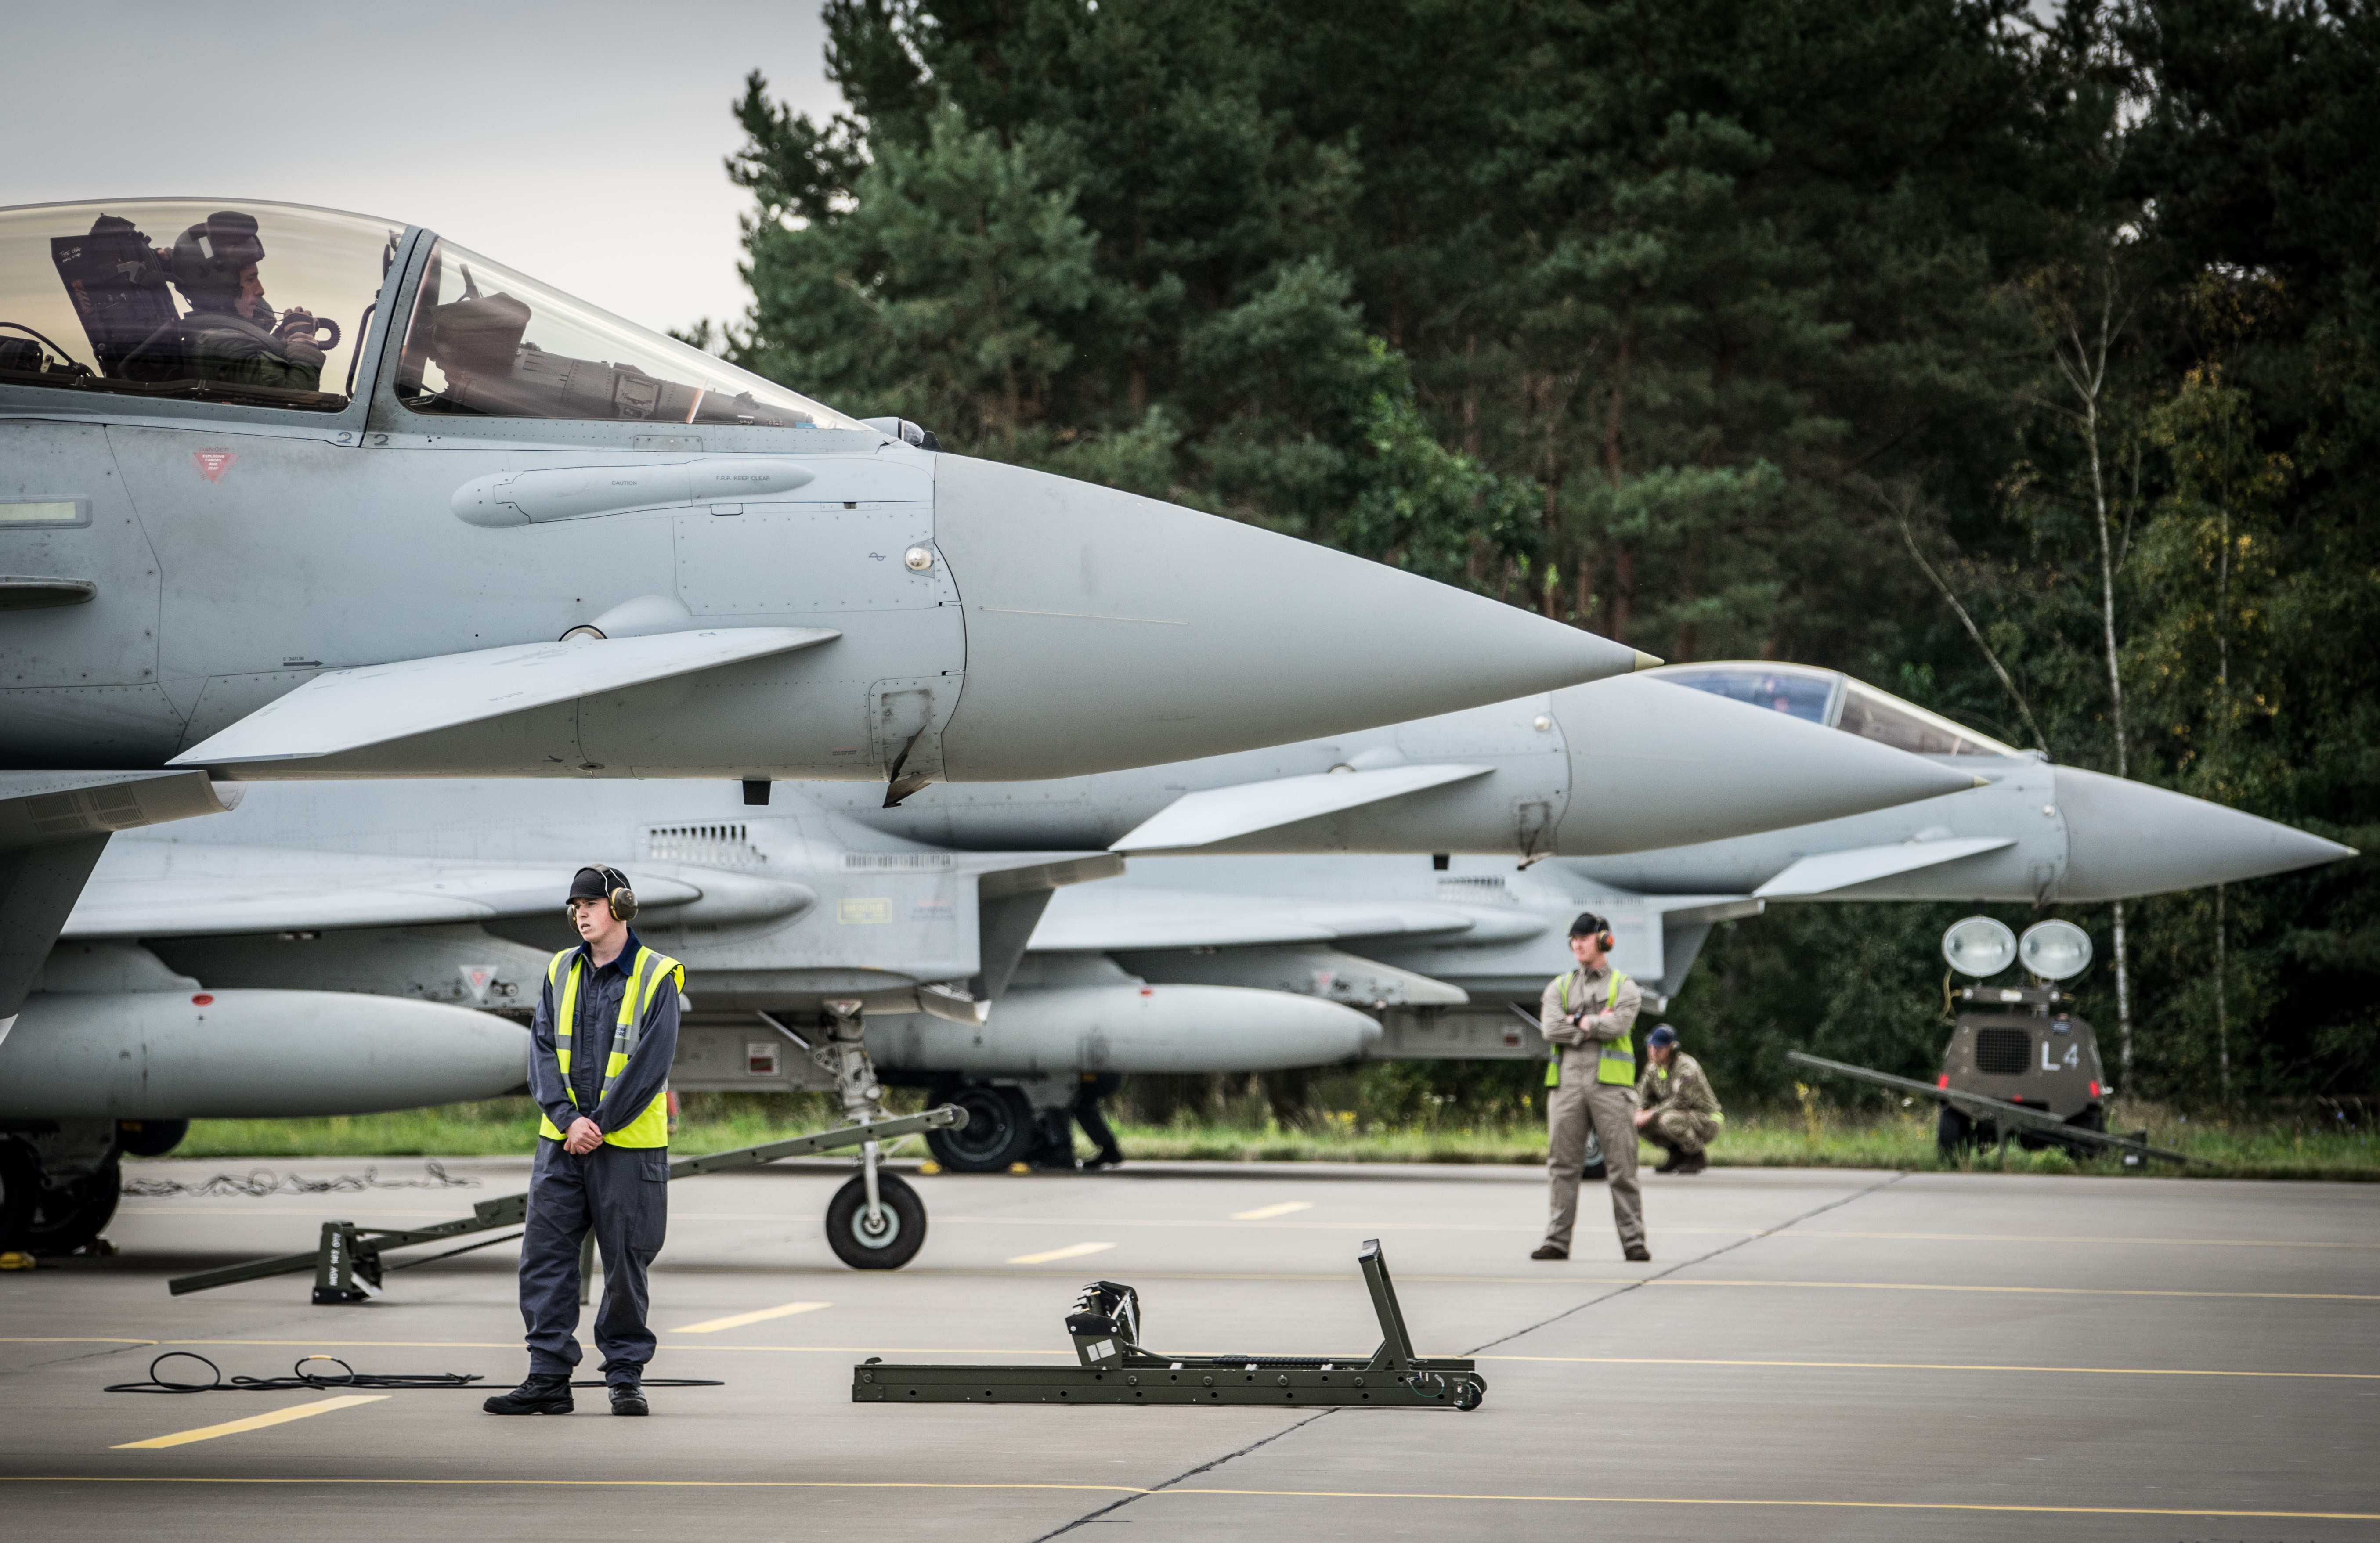 The nose of 2 Typhoons seen on the runway, with engineers positioned beside them. 